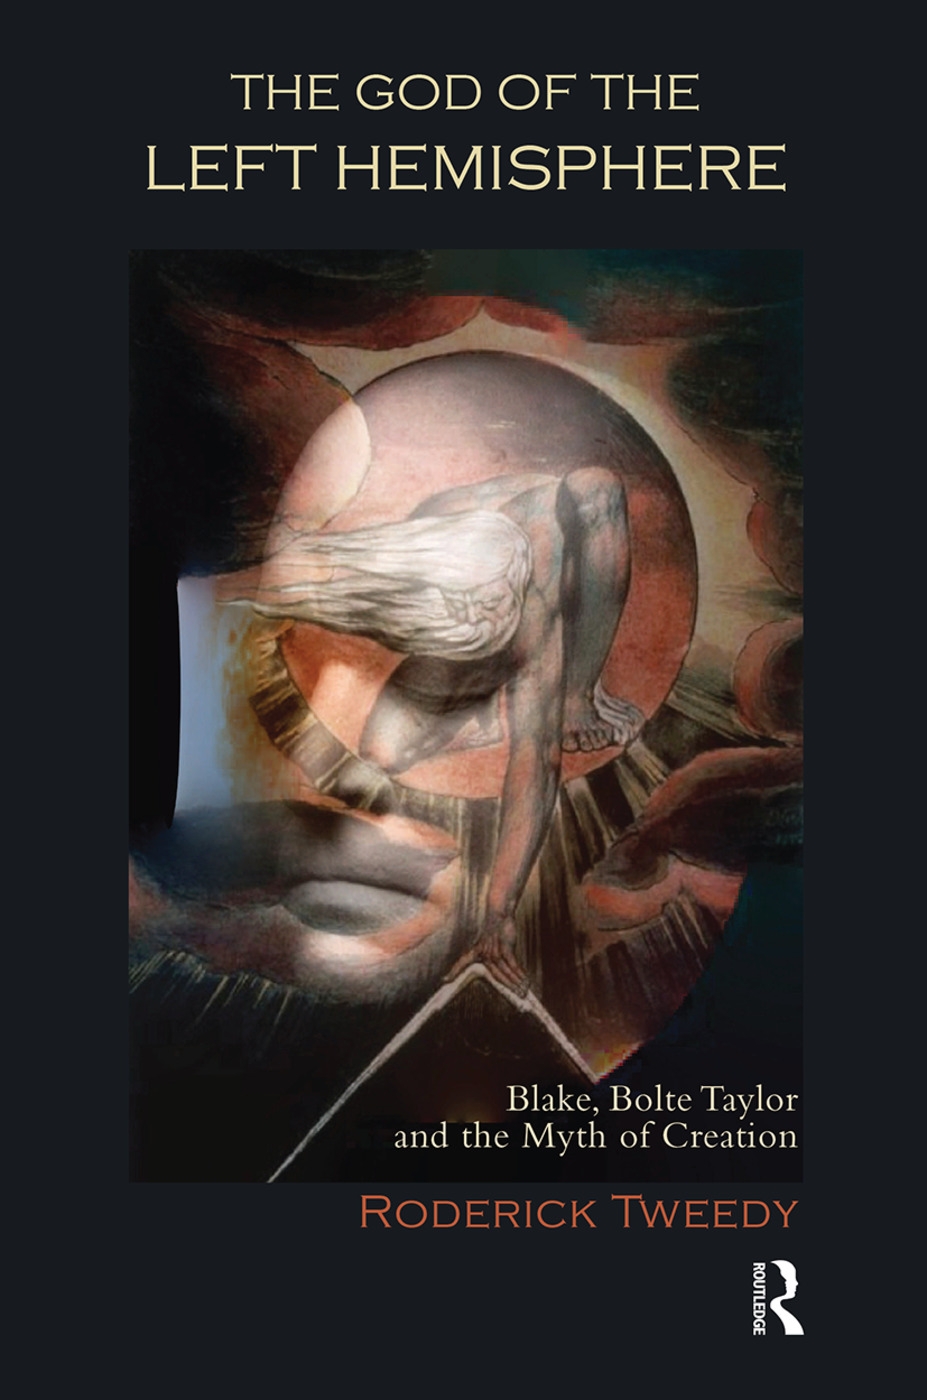 The God of the Left Hemisphere: Blake, Bolte Taylor, and the Myth of Creation